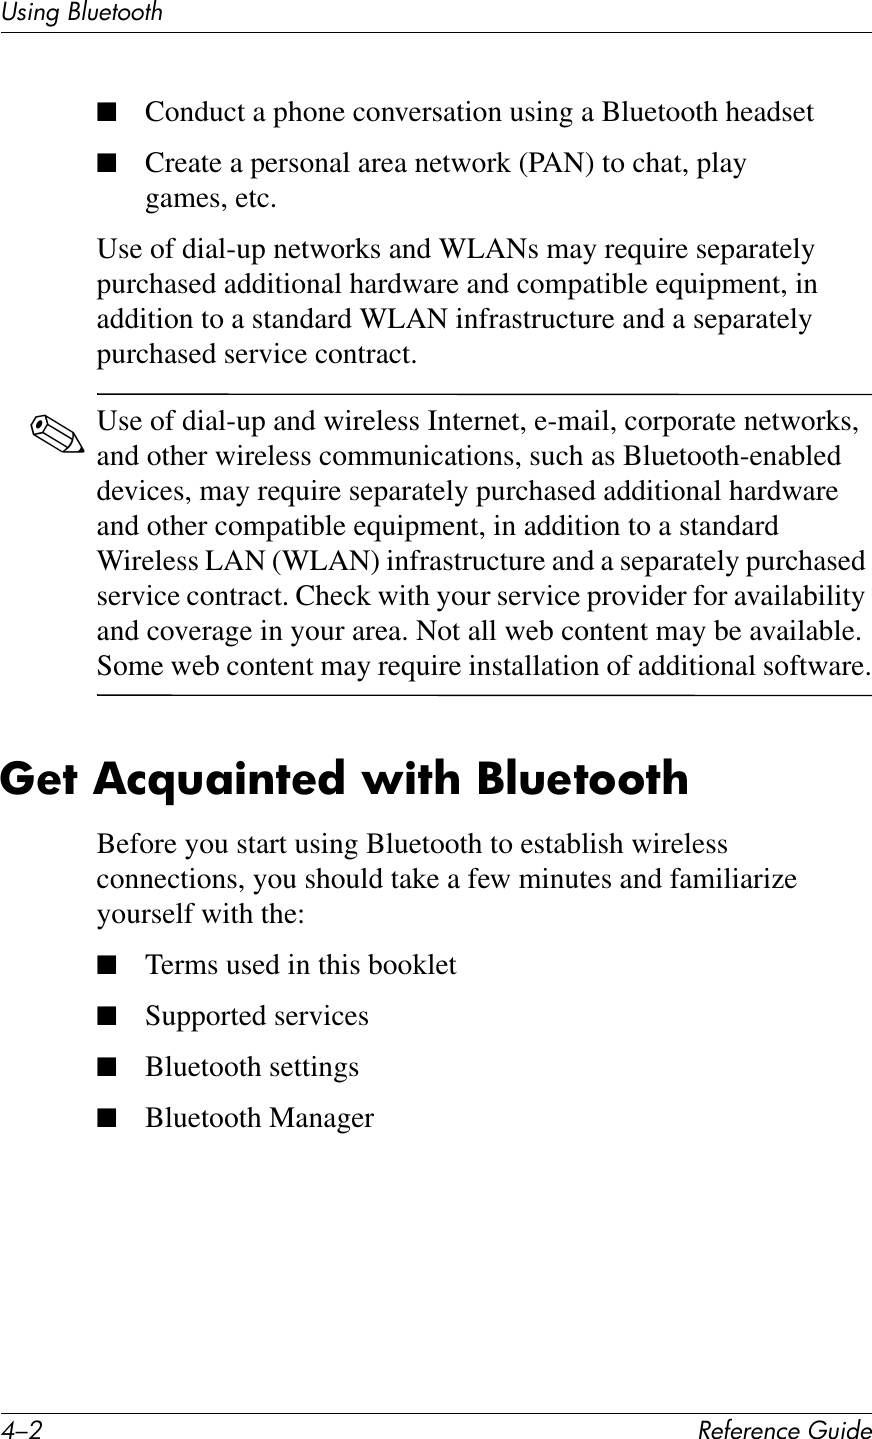 C/0 !&quot;#&quot;$&quot;%&amp;&quot;&apos;()*+&quot;UL*%2&apos;PK)&quot;1771Q■Conduct a phone conversation using a Bluetooth headset■Create a personal area network (PAN) to chat, play games, etc.Use of dial-up networks and WLANs may require separately purchased additional hardware and compatible equipment, in addition to a standard WLAN infrastructure and a separately purchased service contract.✎Use of dial-up and wireless Internet, e-mail, corporate networks, and other wireless communications, such as Bluetooth-enabled devices, may require separately purchased additional hardware and other compatible equipment, in addition to a standard Wireless LAN (WLAN) infrastructure and a separately purchased service contract. Check with your service provider for availability and coverage in your area. Not all web content may be available. Some web content may require installation of additional software.0&quot;7&amp;,%=(;)$7&quot;*&amp;L)7?&amp;C@(&quot;7667?Before you start using Bluetooth to establish wireless connections, you should take a few minutes and familiarize yourself with the:■Terms used in this booklet■Supported services■Bluetooth settings■Bluetooth Manager